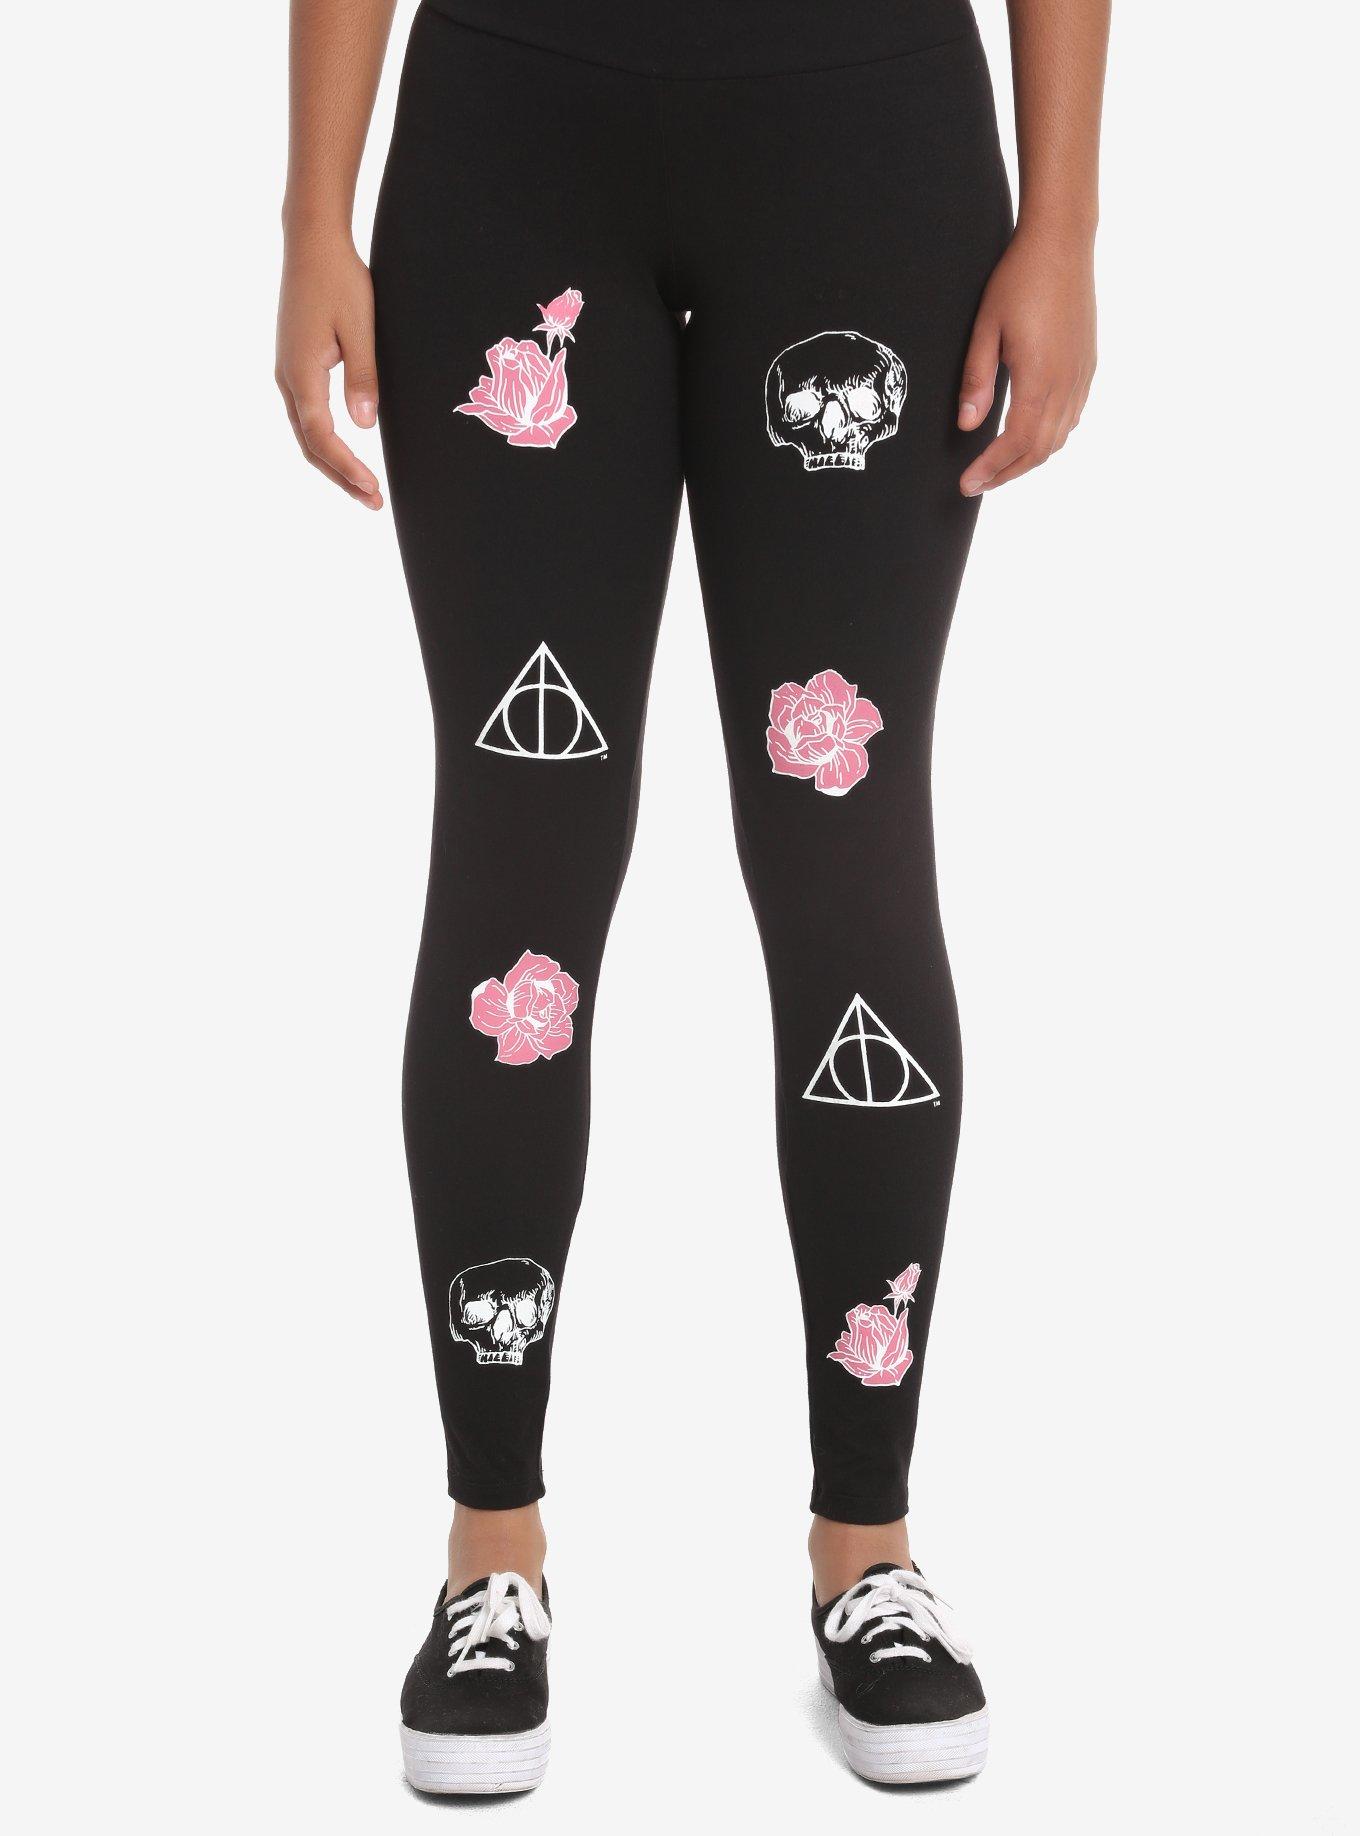 Harry Potter Deathly Hallows Floral Leggings Size XS - $27 - From Krista